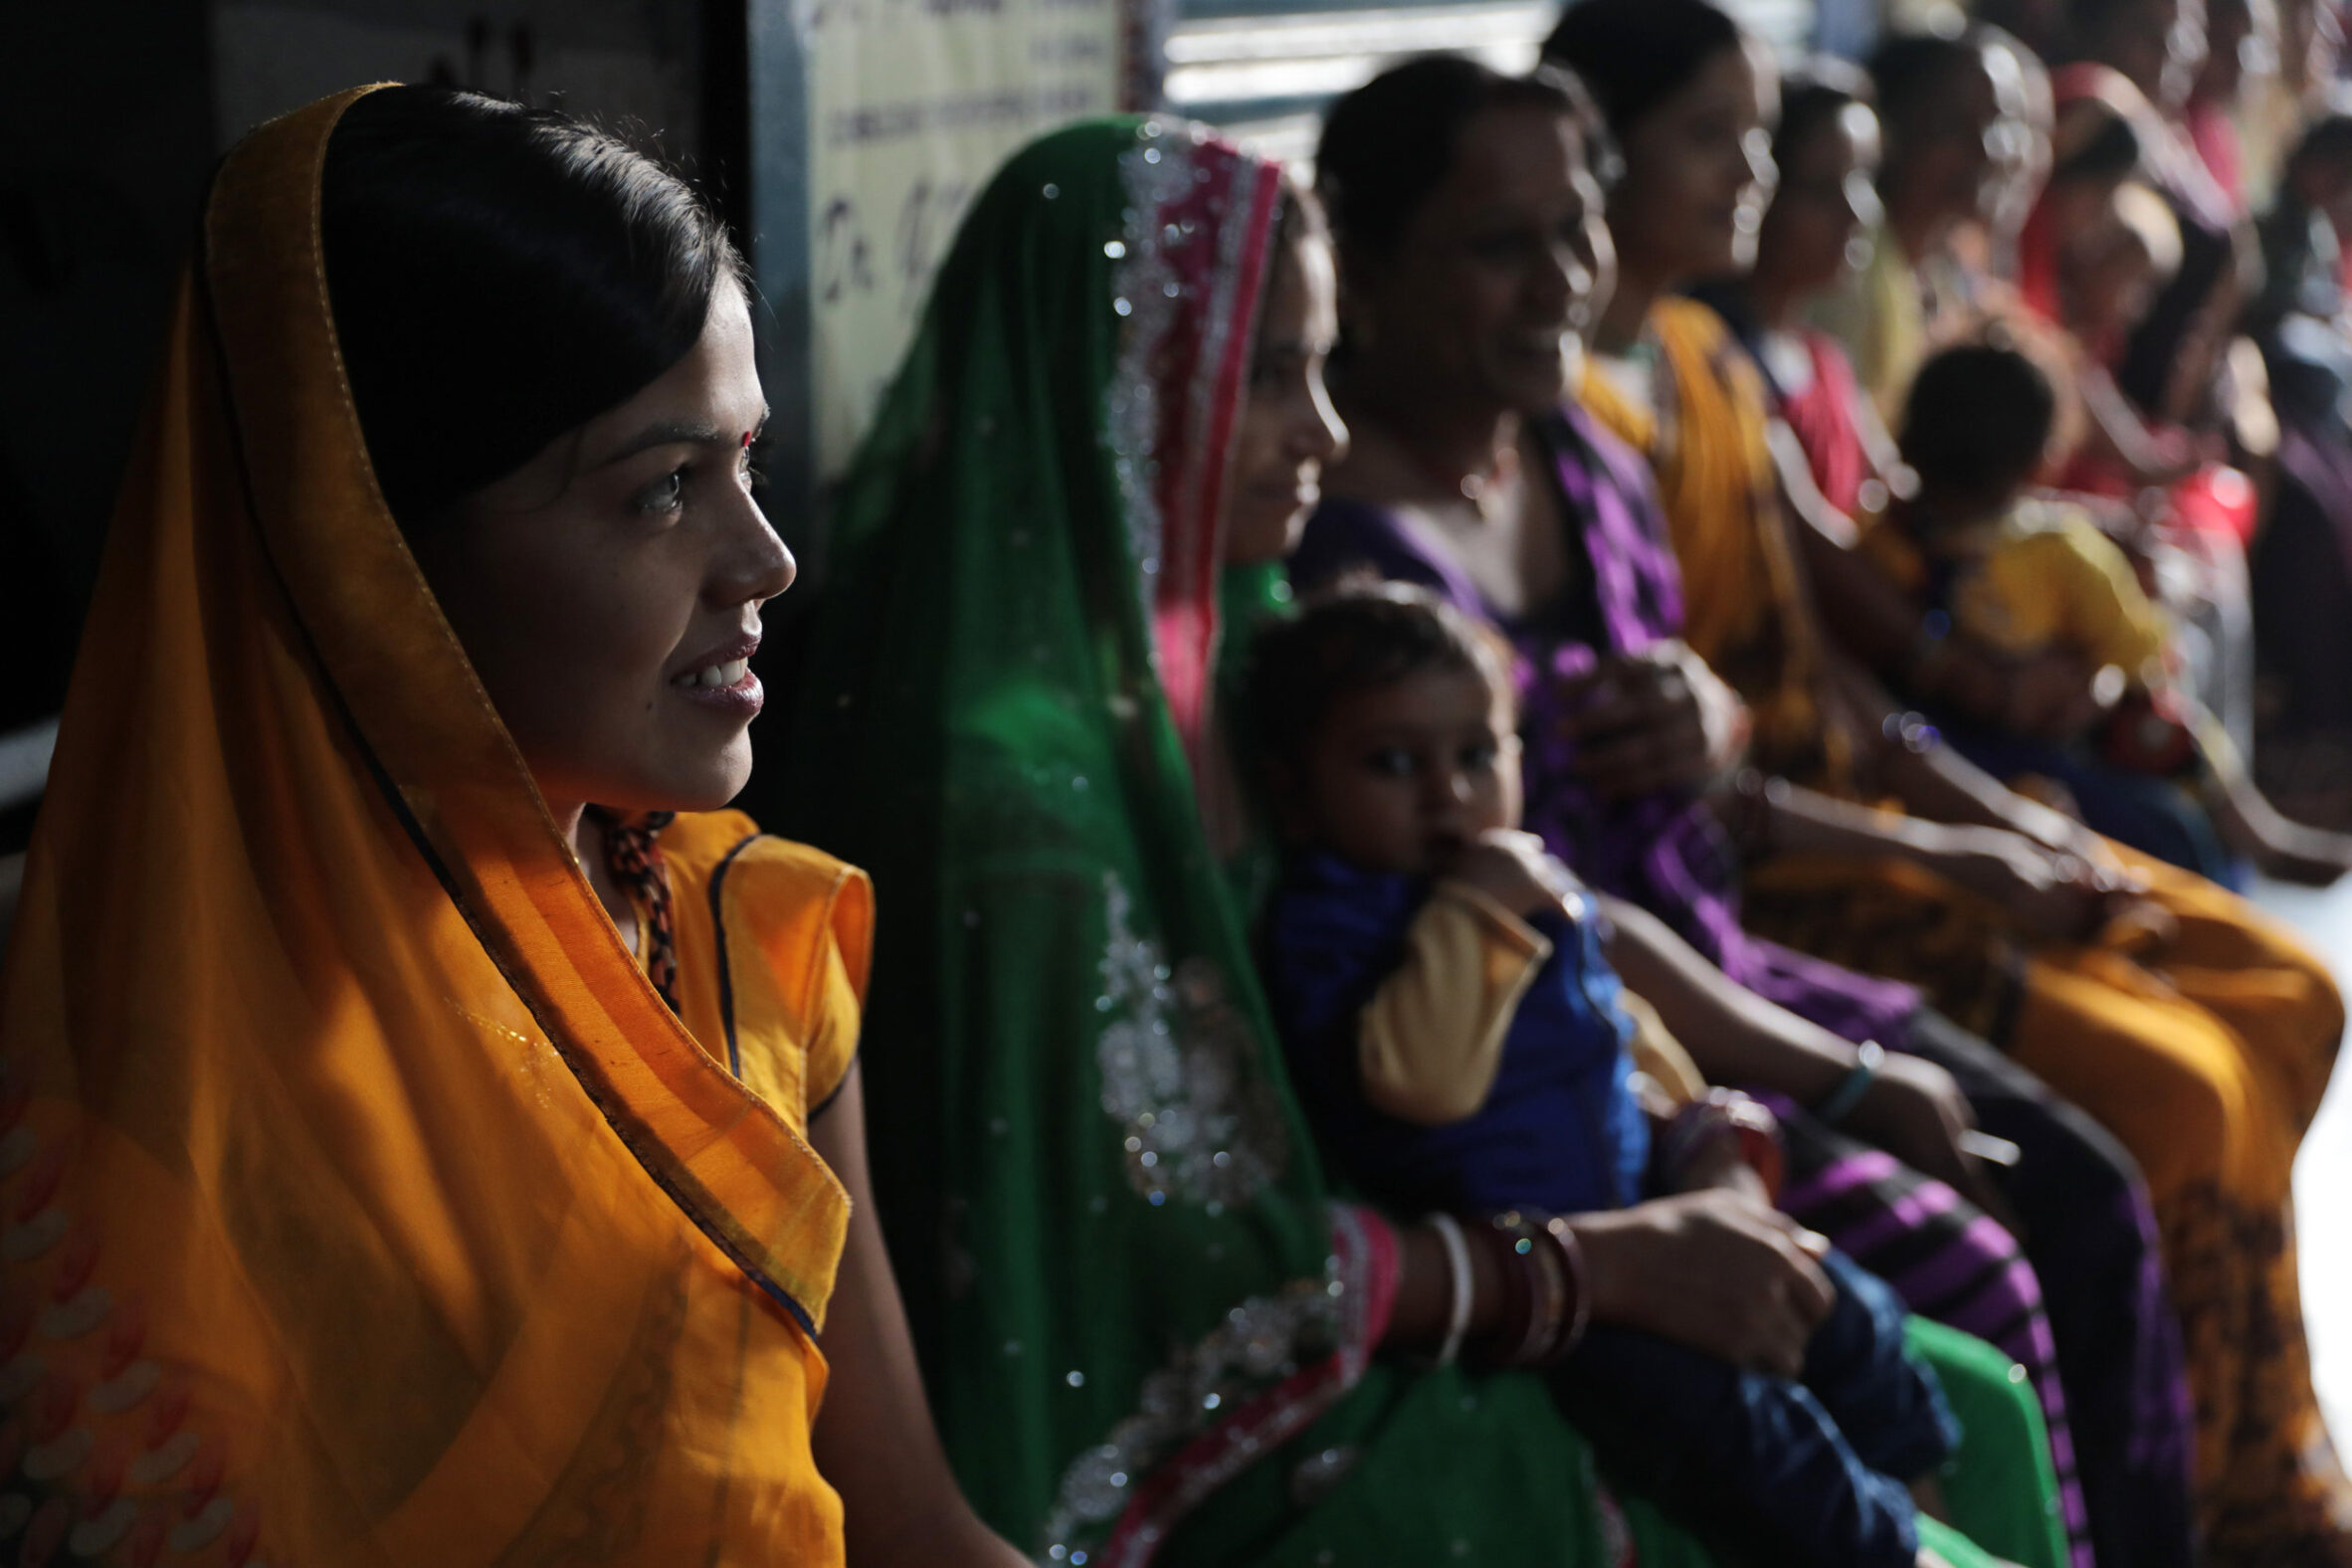 Women await their turn for counseling on contraceptive options at a private DIMPA OB-GYN clinic.